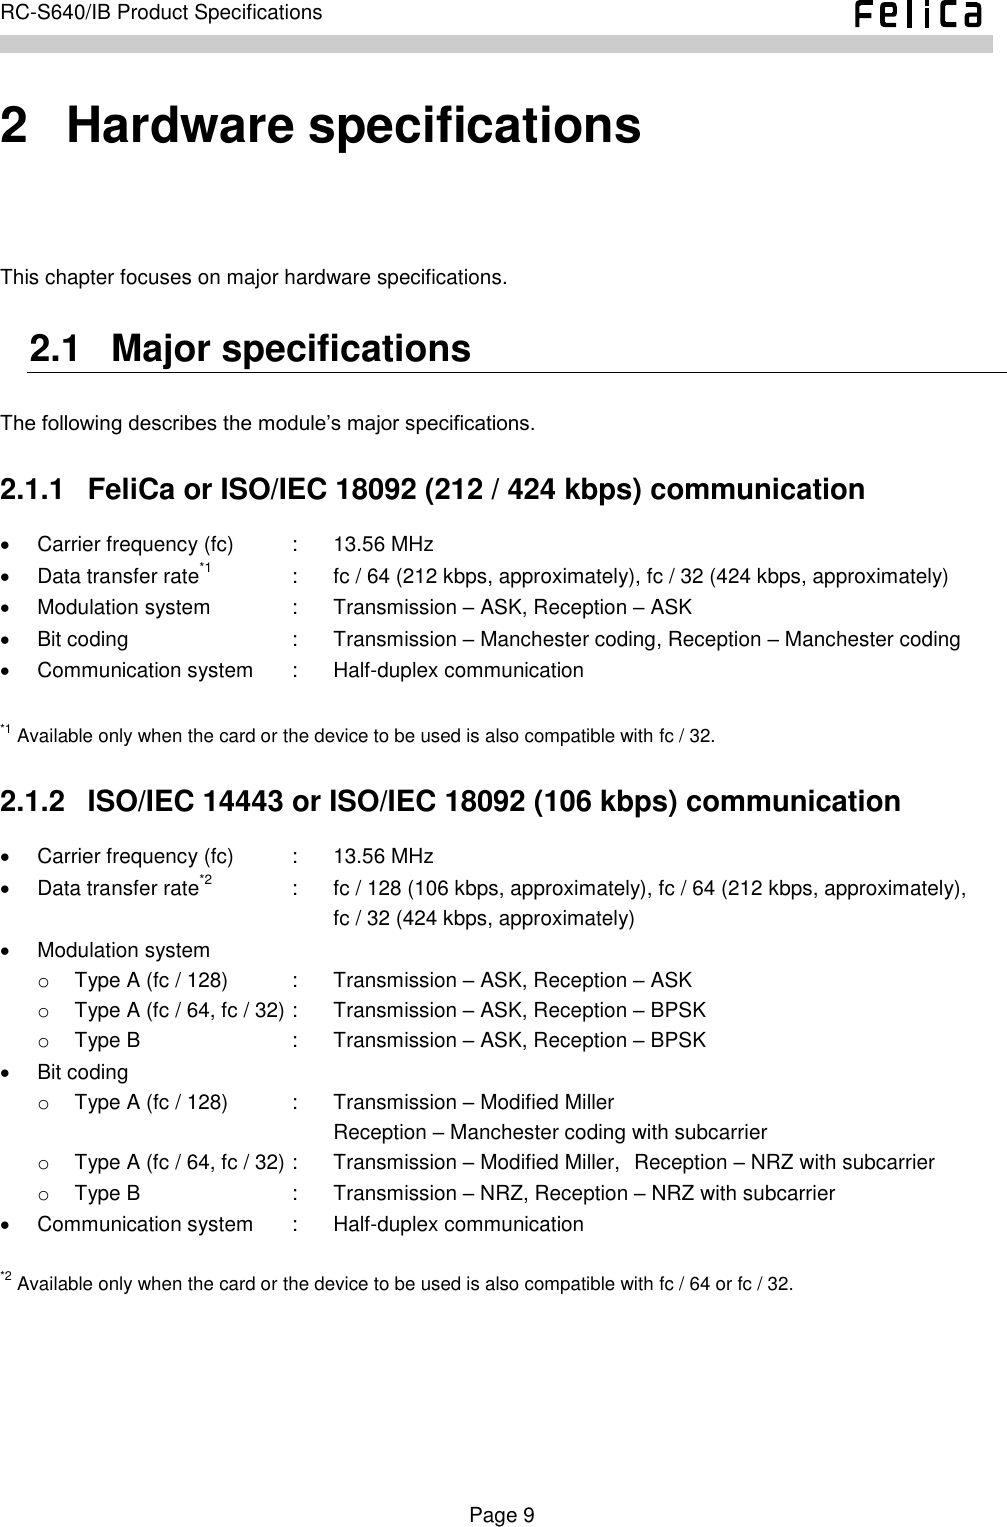    Page 9     RC-S640/IB Product Specifications    2   Hardware specifications This chapter focuses on major hardware specifications. 2.1   Major specifications The following describes the module’s major specifications. 2.1.1   FeliCa or ISO/IEC 18092 (212 / 424 kbps) communication   Carrier frequency (fc)  :  13.56 MHz   Data transfer rate*1  :  fc / 64 (212 kbps, approximately), fc / 32 (424 kbps, approximately)   Modulation system  :  Transmission – ASK, Reception – ASK   Bit coding  :  Transmission – Manchester coding, Reception – Manchester coding   Communication system  :  Half-duplex communication  *1 Available only when the card or the device to be used is also compatible with fc / 32. 2.1.2   ISO/IEC 14443 or ISO/IEC 18092 (106 kbps) communication   Carrier frequency (fc)  :  13.56 MHz   Data transfer rate*2  :  fc / 128 (106 kbps, approximately), fc / 64 (212 kbps, approximately),       fc / 32 (424 kbps, approximately)   Modulation system o  Type A (fc / 128)  :  Transmission – ASK, Reception – ASK o  Type A (fc / 64, fc / 32) :  Transmission – ASK, Reception – BPSK o  Type B  :  Transmission – ASK, Reception – BPSK   Bit coding o  Type A (fc / 128)  :  Transmission – Modified Miller      Reception – Manchester coding with subcarrier o  Type A (fc / 64, fc / 32) :  Transmission – Modified Miller,  Reception – NRZ with subcarrier o  Type B  :  Transmission – NRZ, Reception – NRZ with subcarrier   Communication system  :  Half-duplex communication  *2 Available only when the card or the device to be used is also compatible with fc / 64 or fc / 32.    